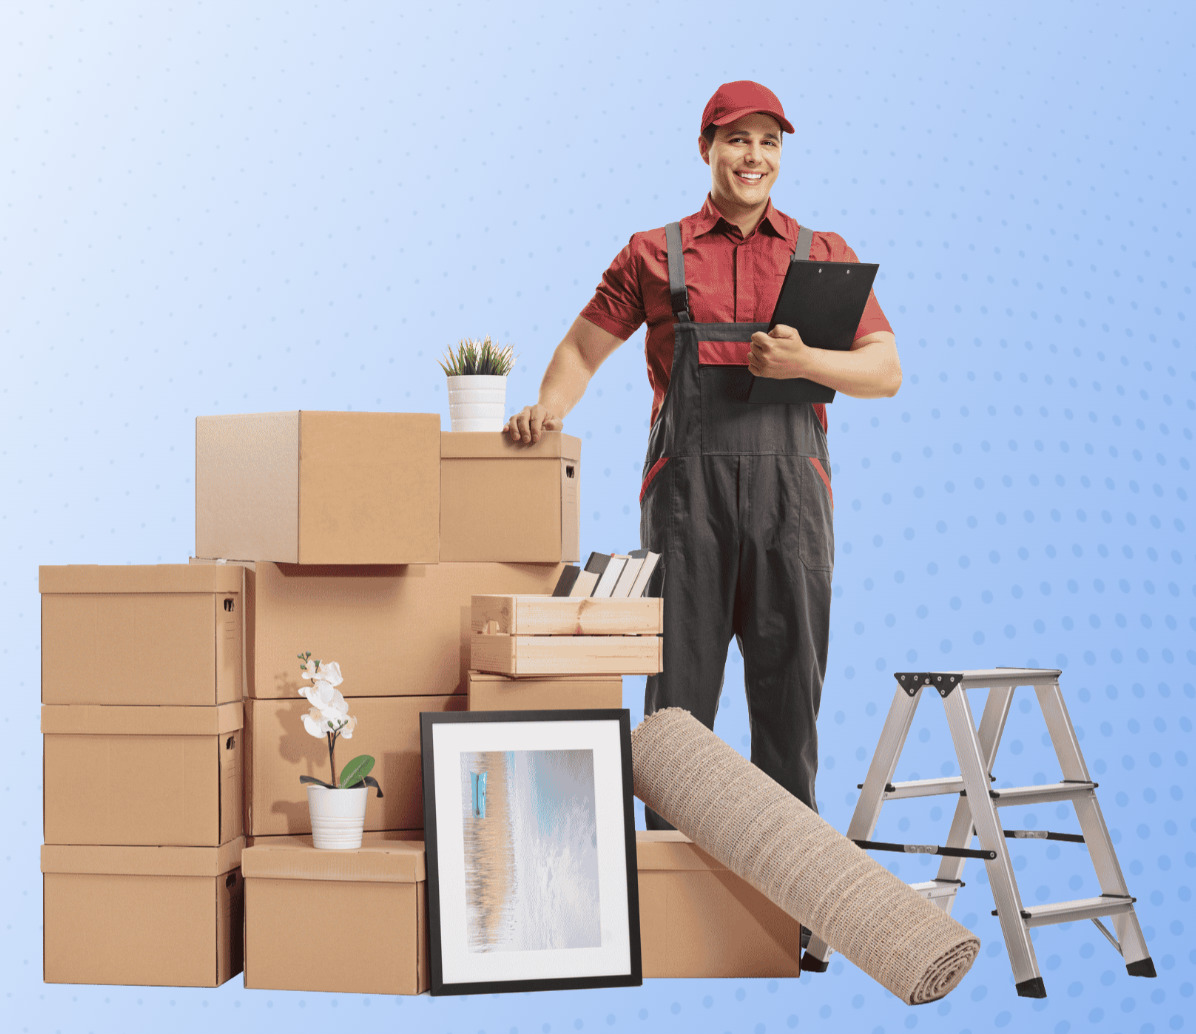 Top Moving And Storage Inc. For over 10 years now, the company based out of San Jose has become the go-to name for people in the area for all their packing and moving needs